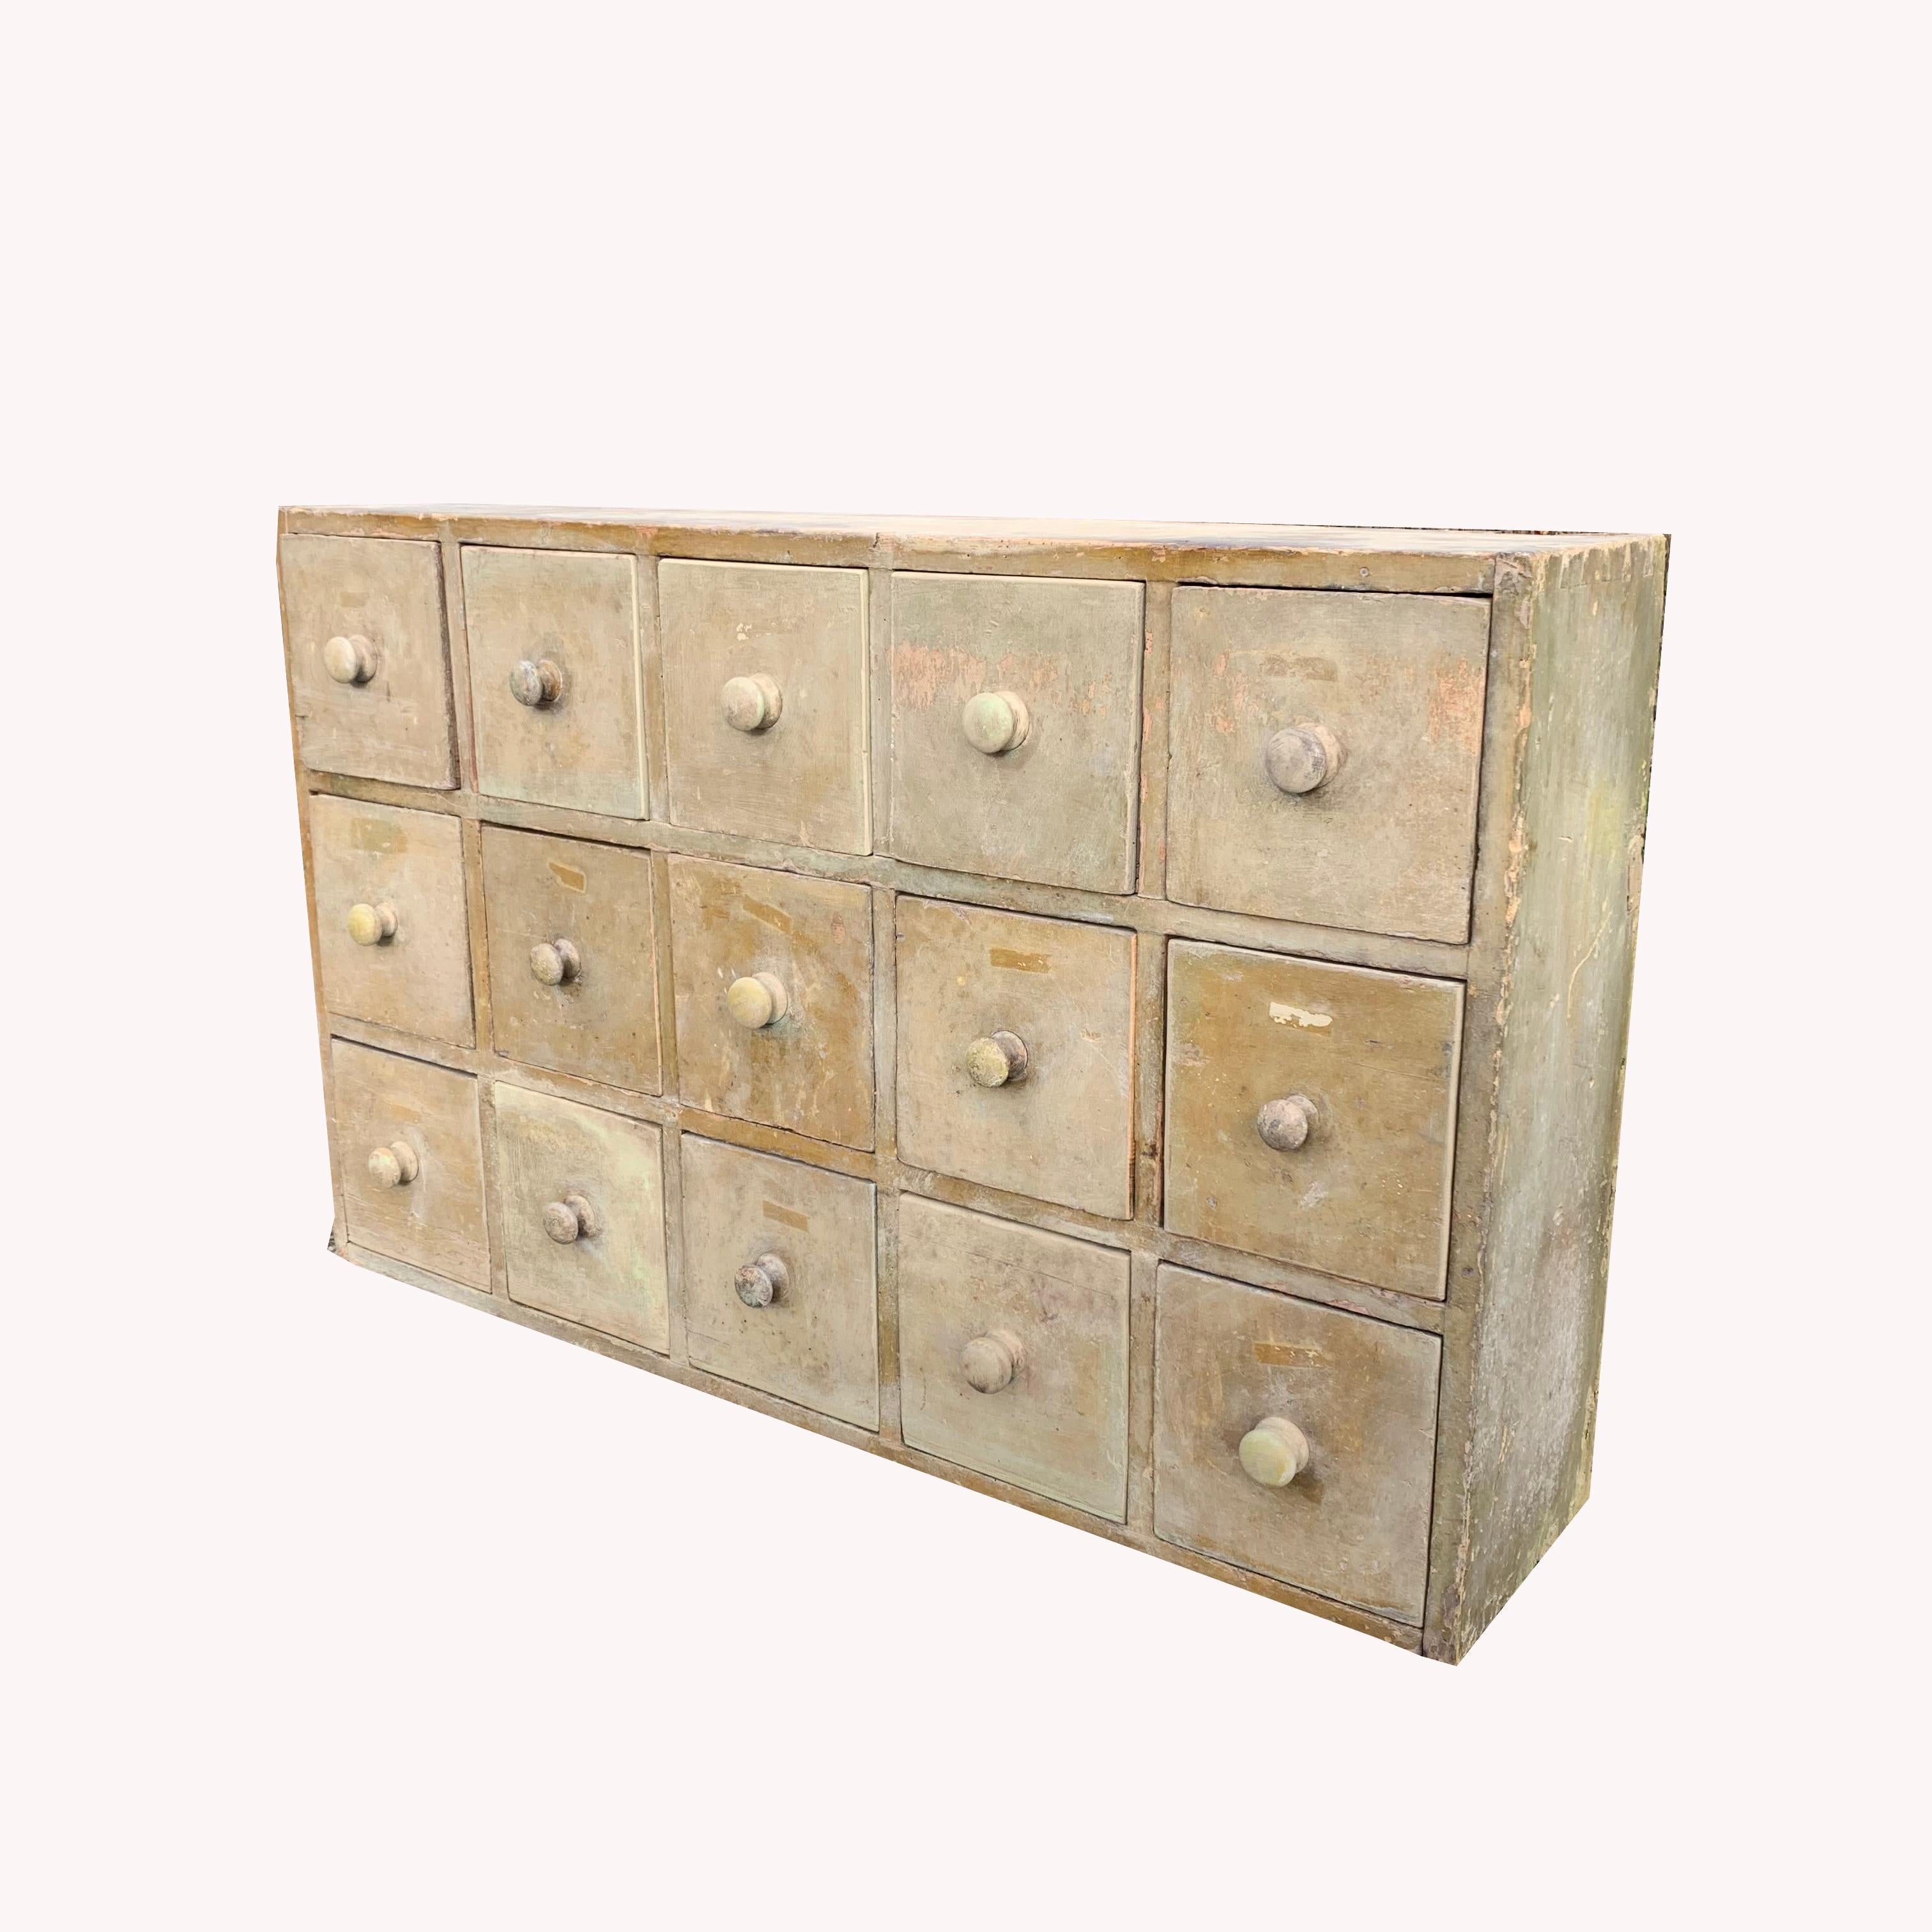 A fabulous early 20th century table-top painted pine bank of 15 drawers from a workshop.
Retaining the original soft-tone 'duck-egg blue'/greenie-grey paint which is beautifully aged and faded,
A great example that would add immense character to a